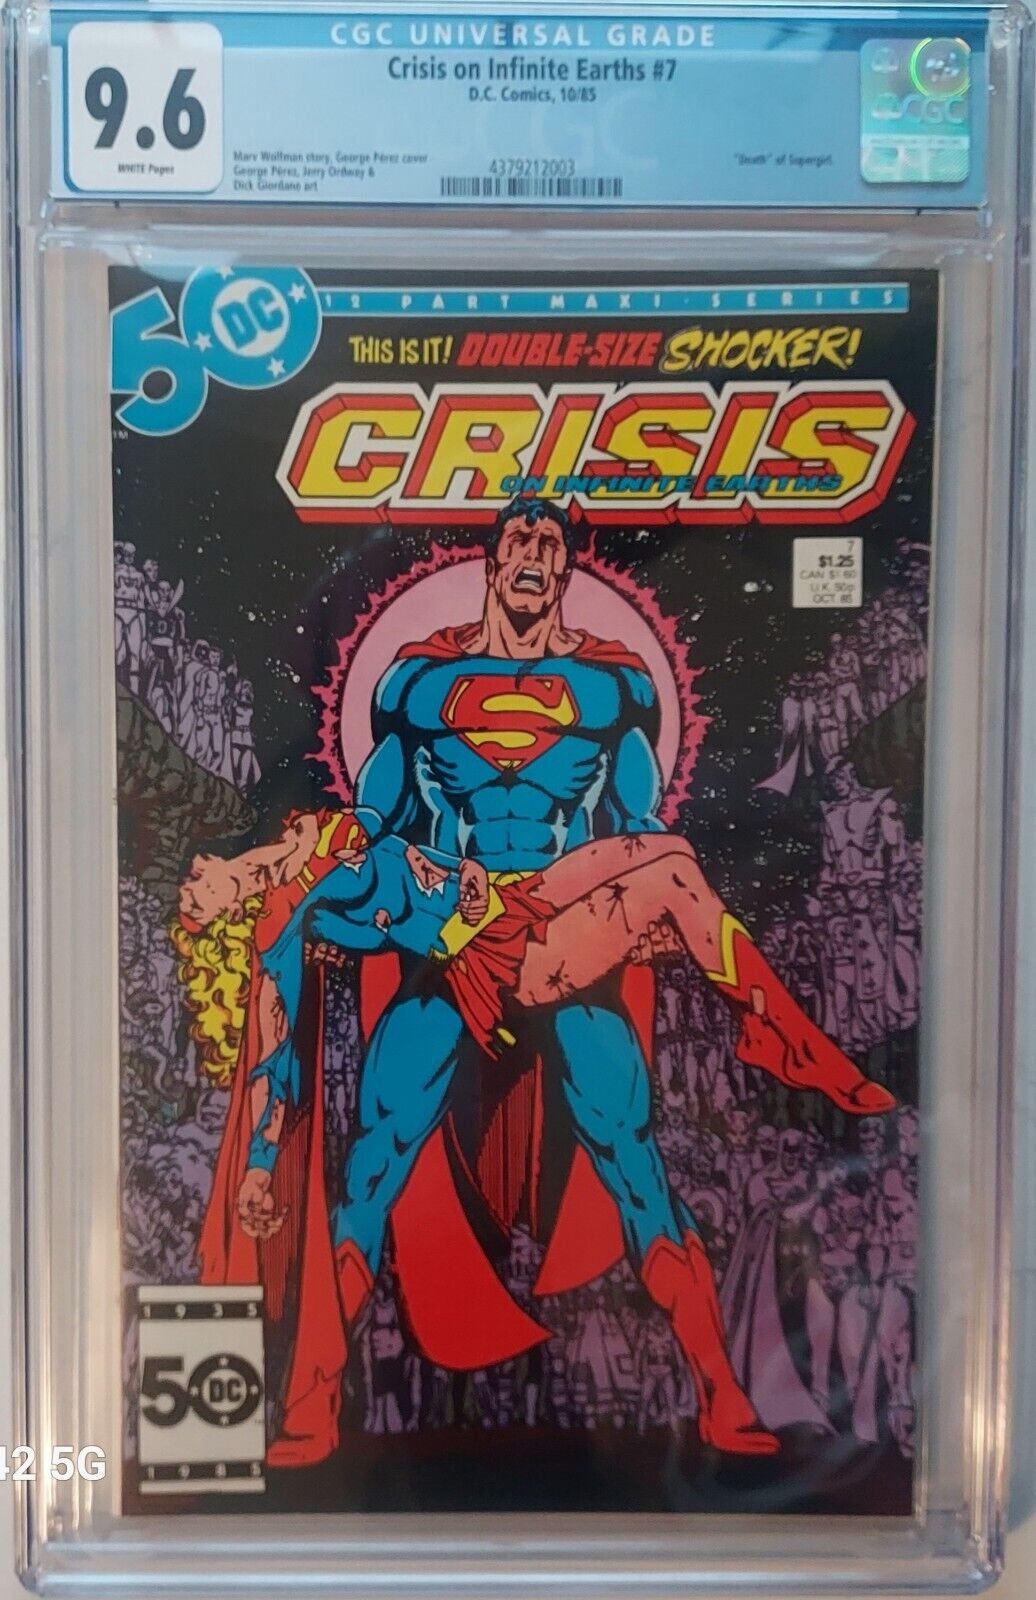 Crisis on Infinite Earths #7 CGC 9.6 4379212003 KEY COVER Death Supergirl